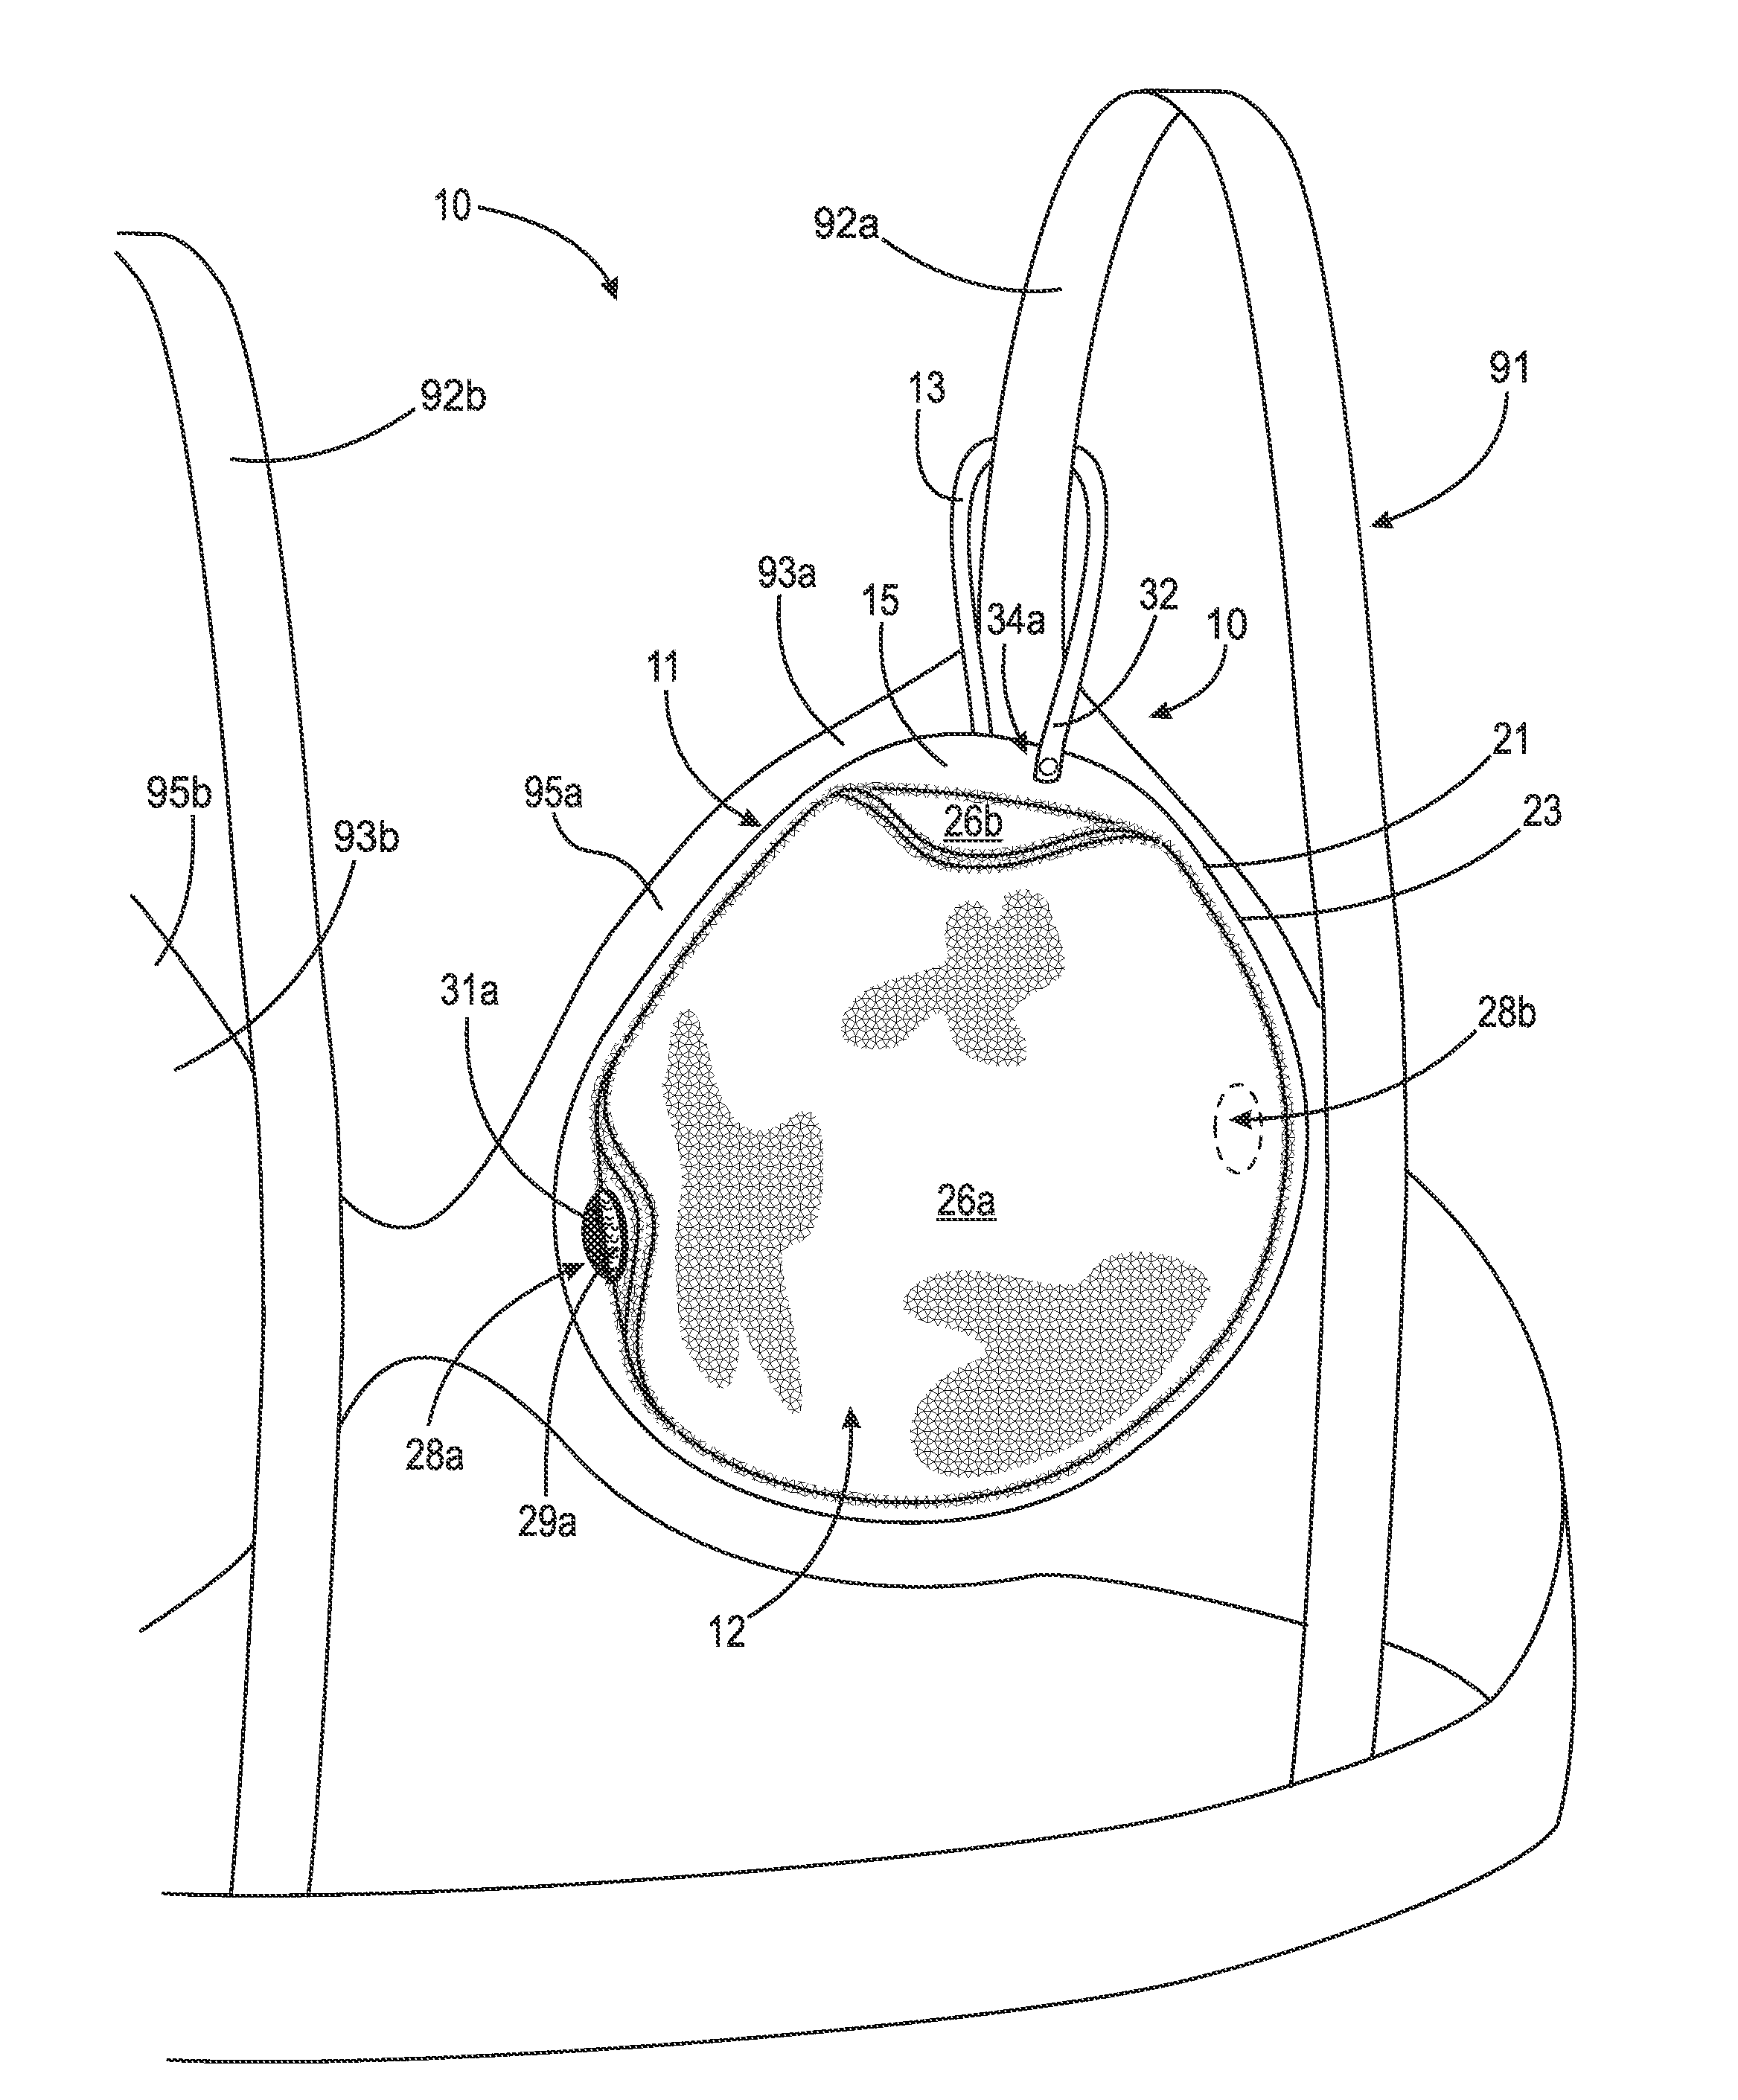 Thermal device for treating breastfeeding conditions